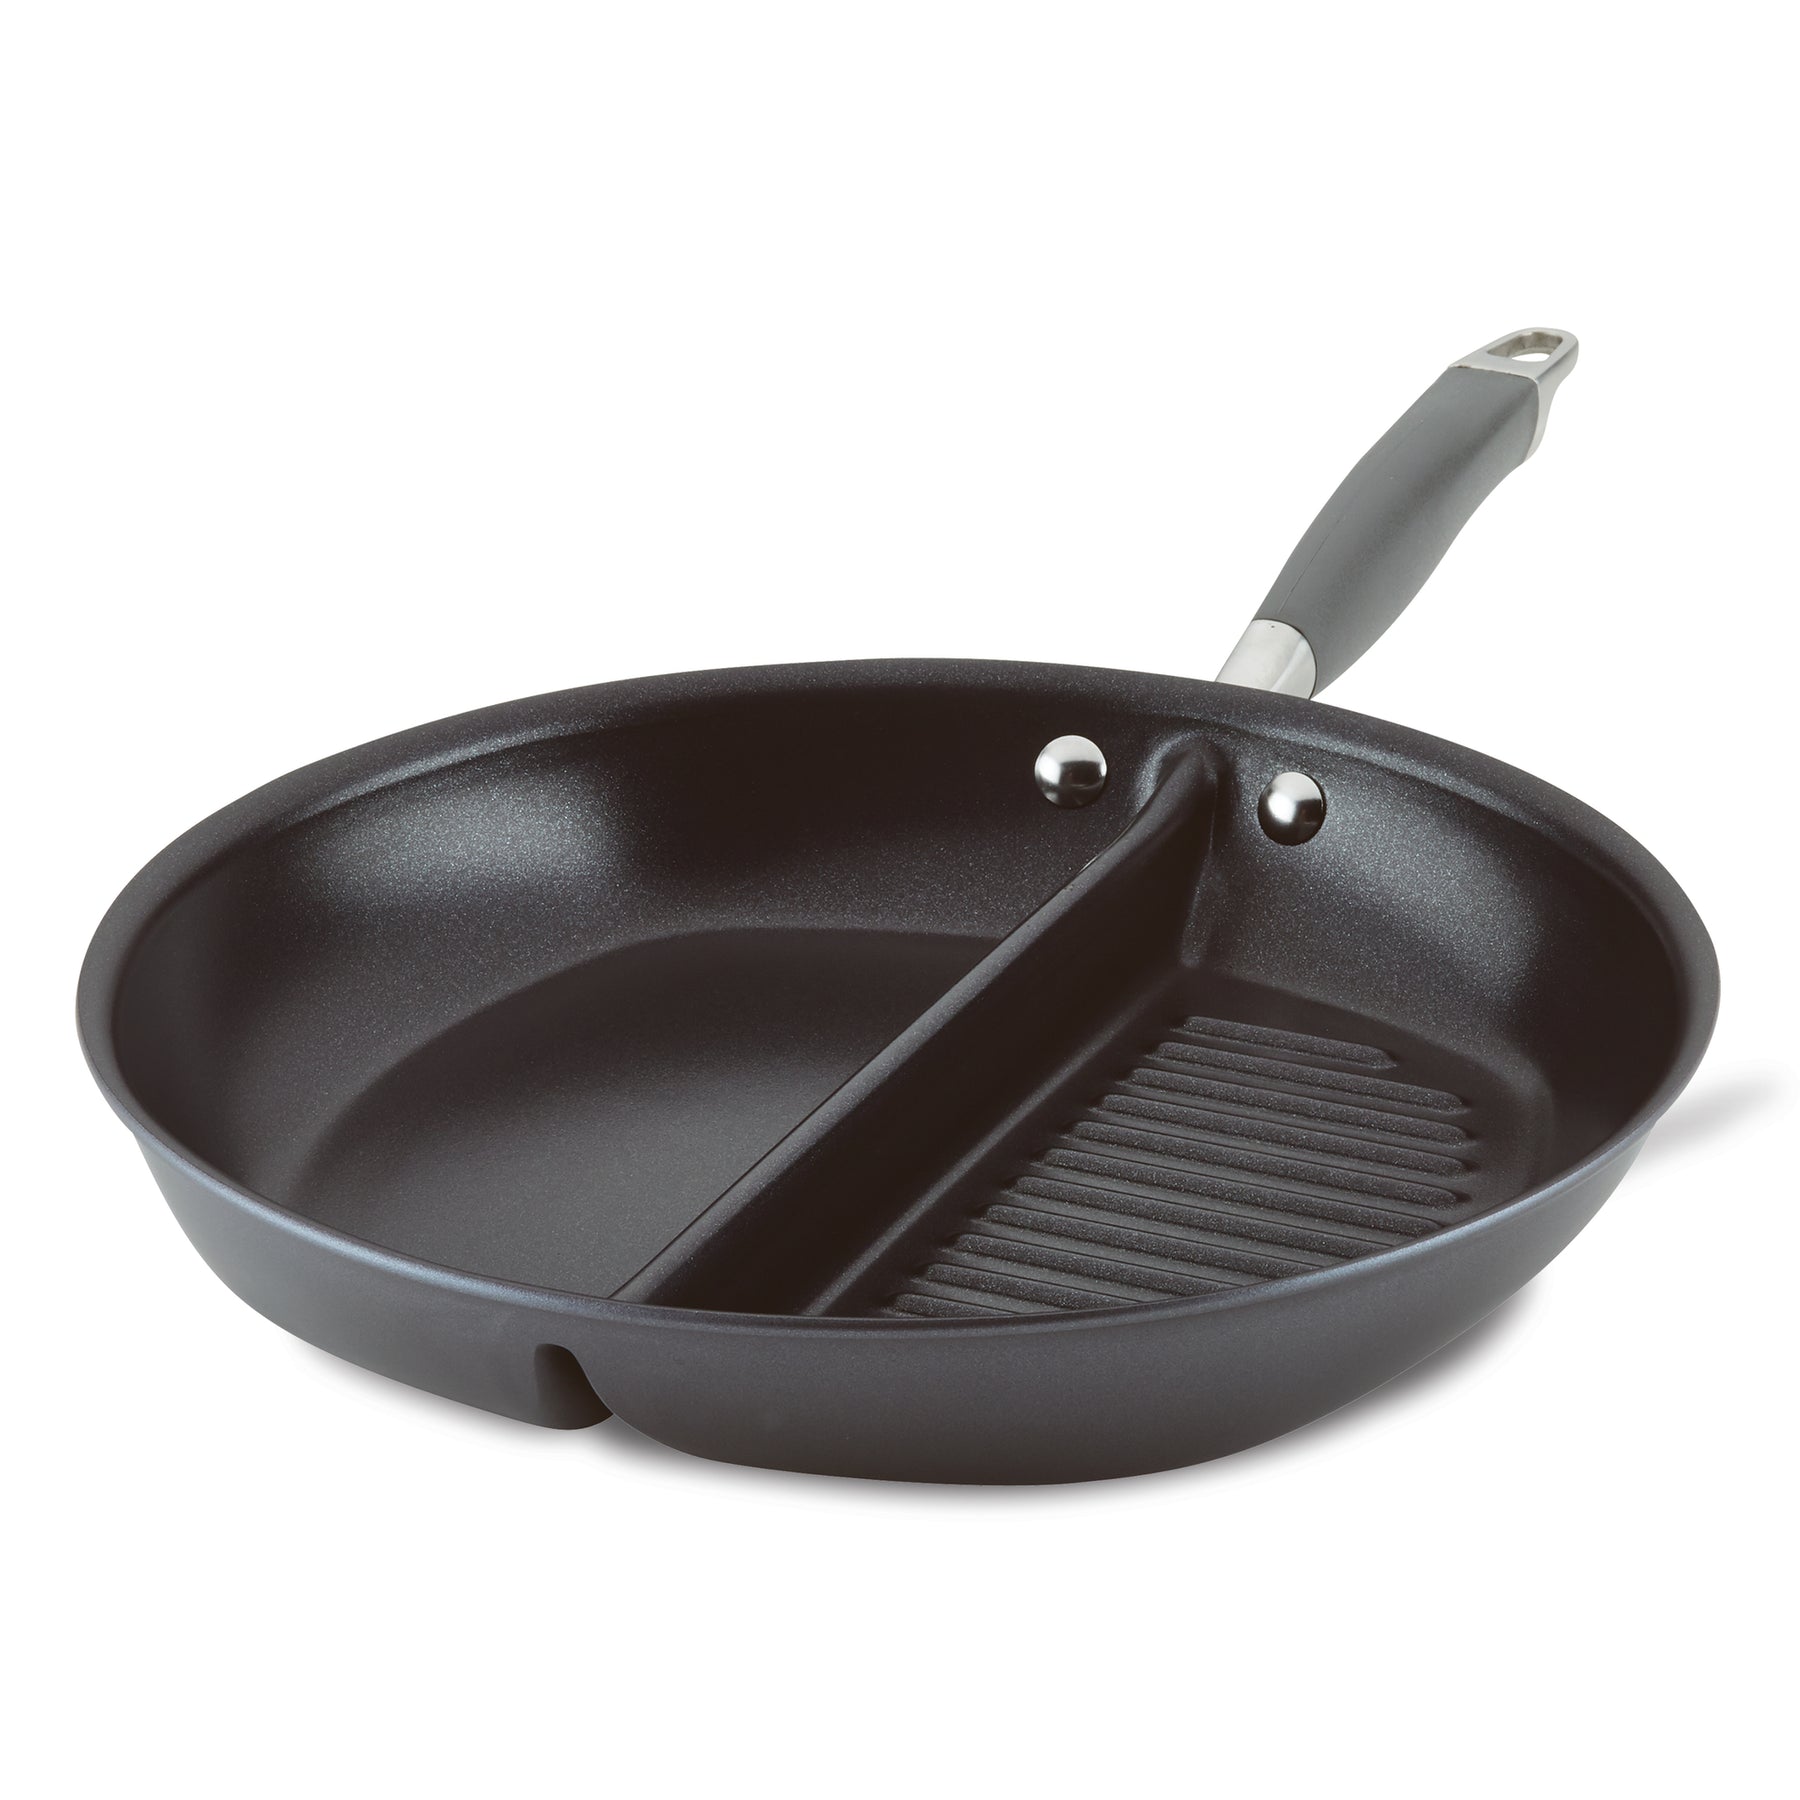 Breakfast Pan Grill Pan 11 Inch Nonstick 3 Section Divided